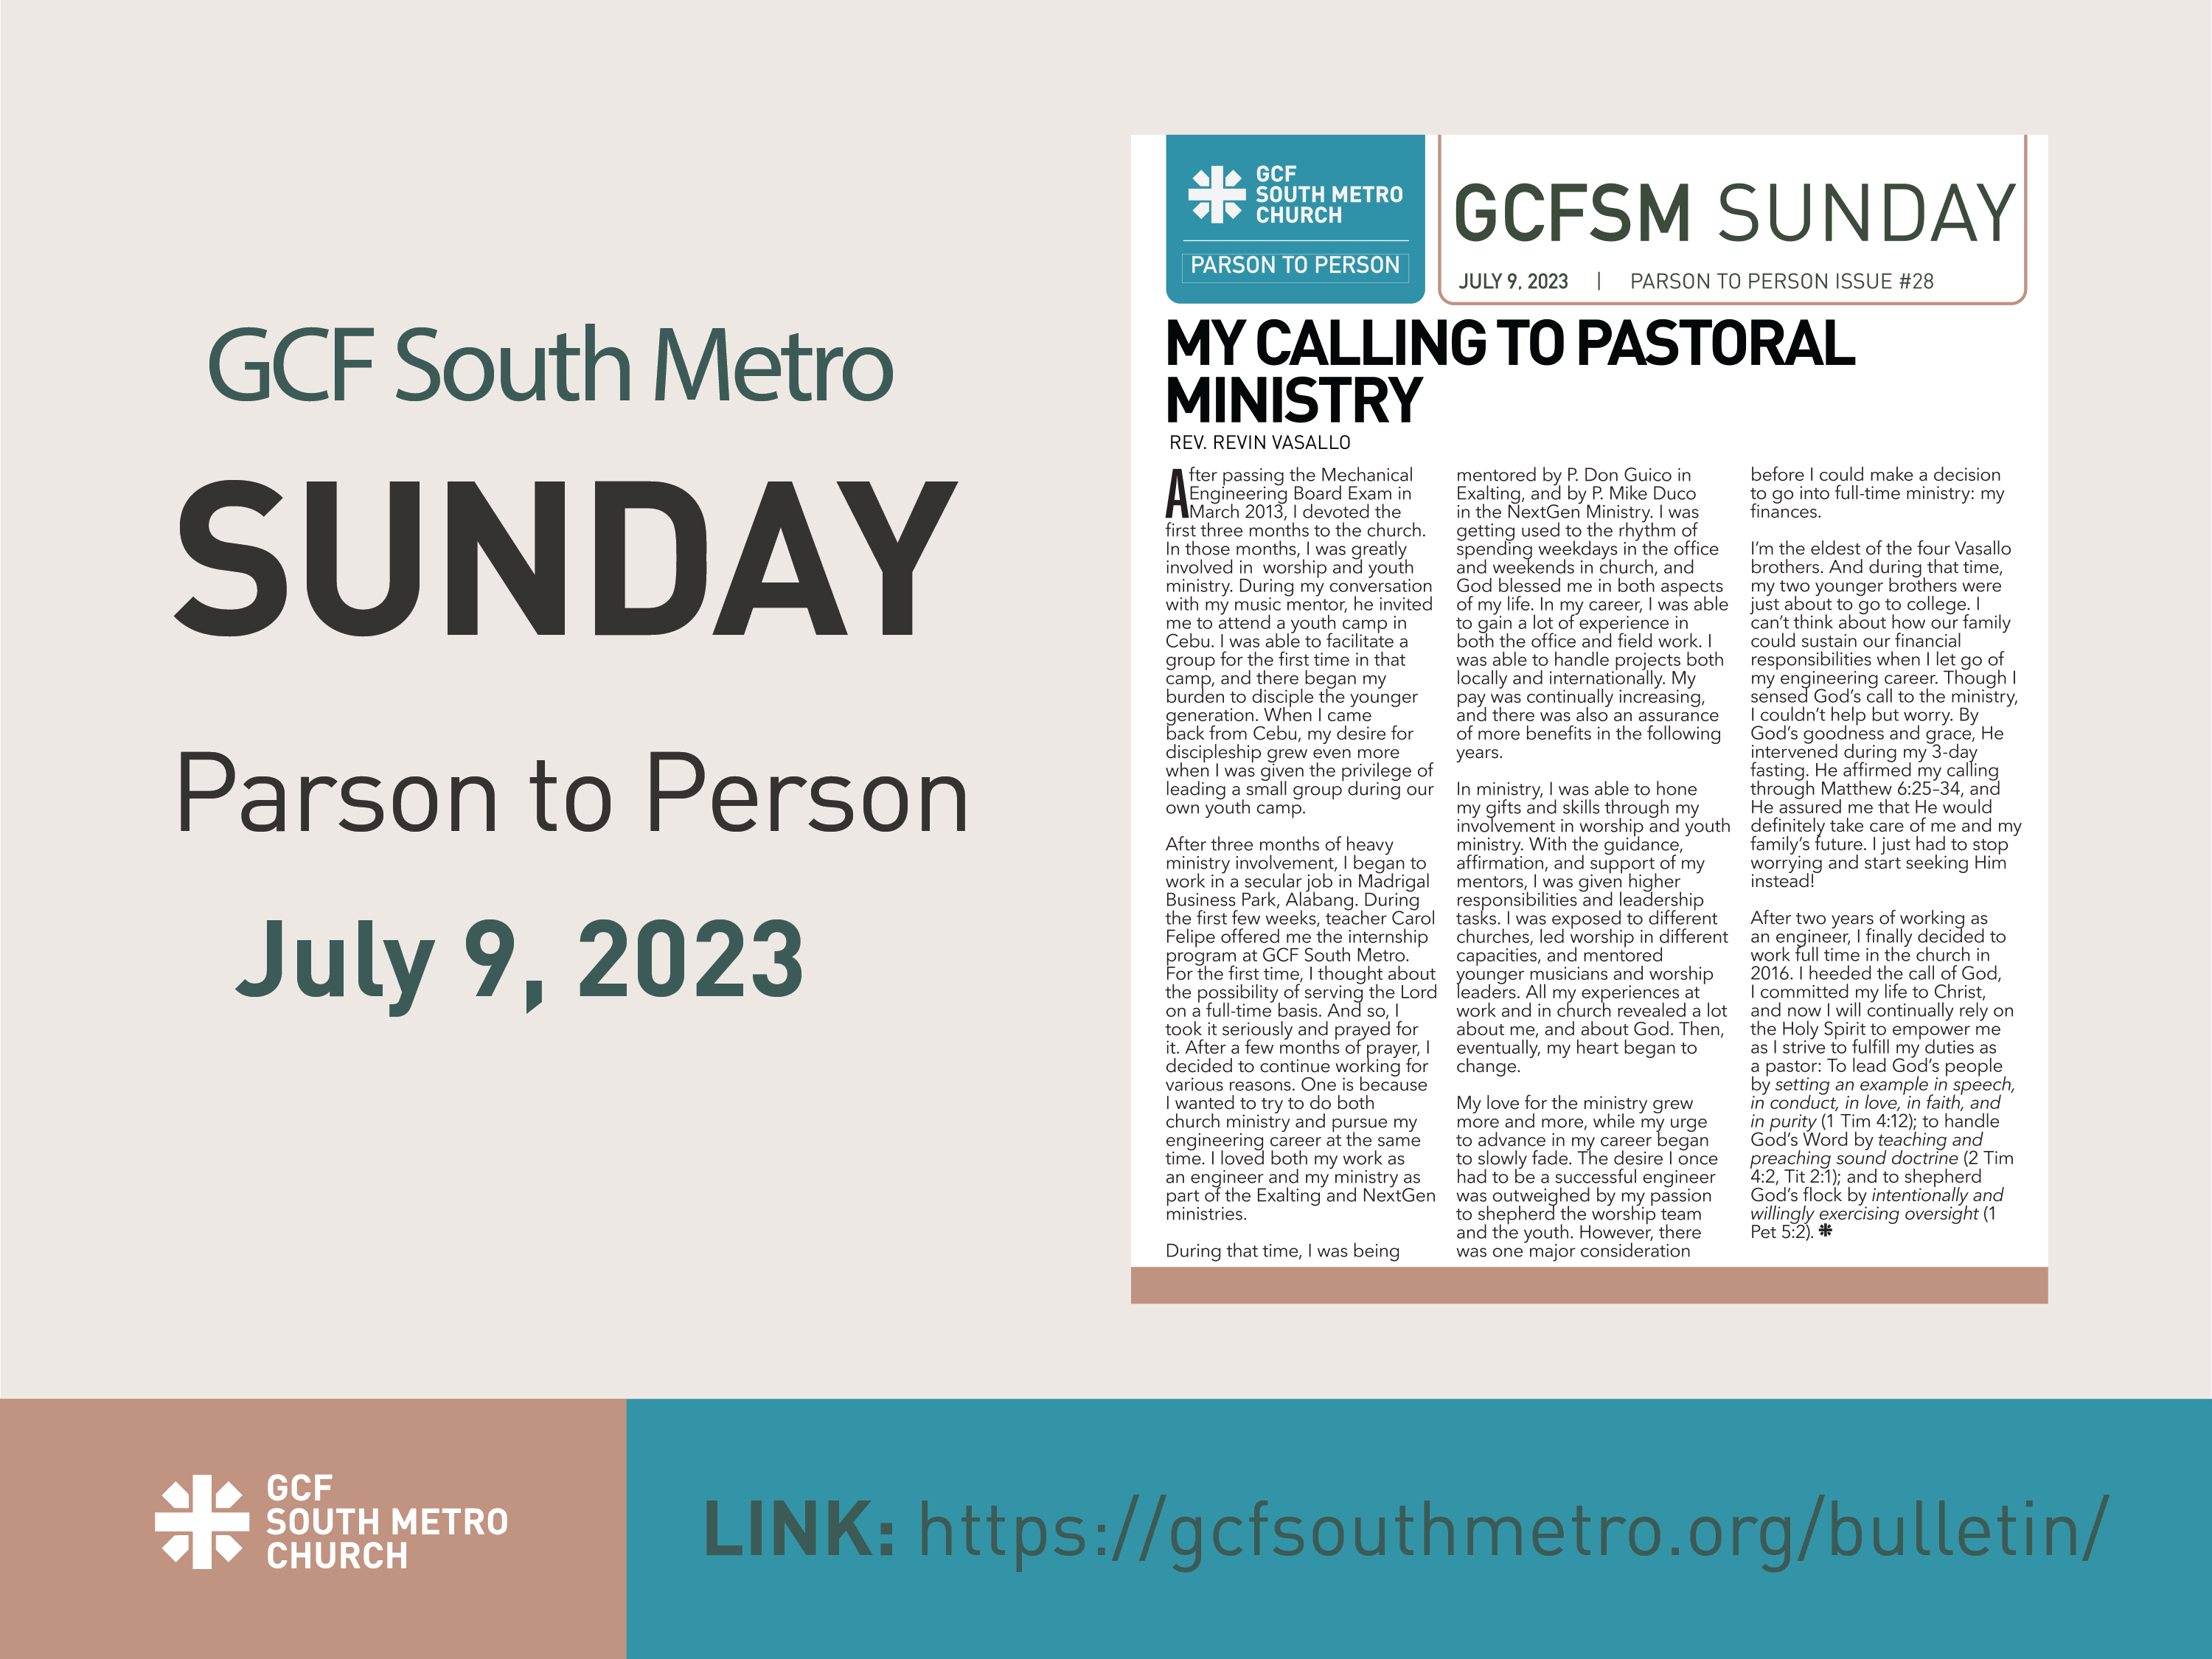 Sunday Bulletin – Parson to Person, July 9, 2023